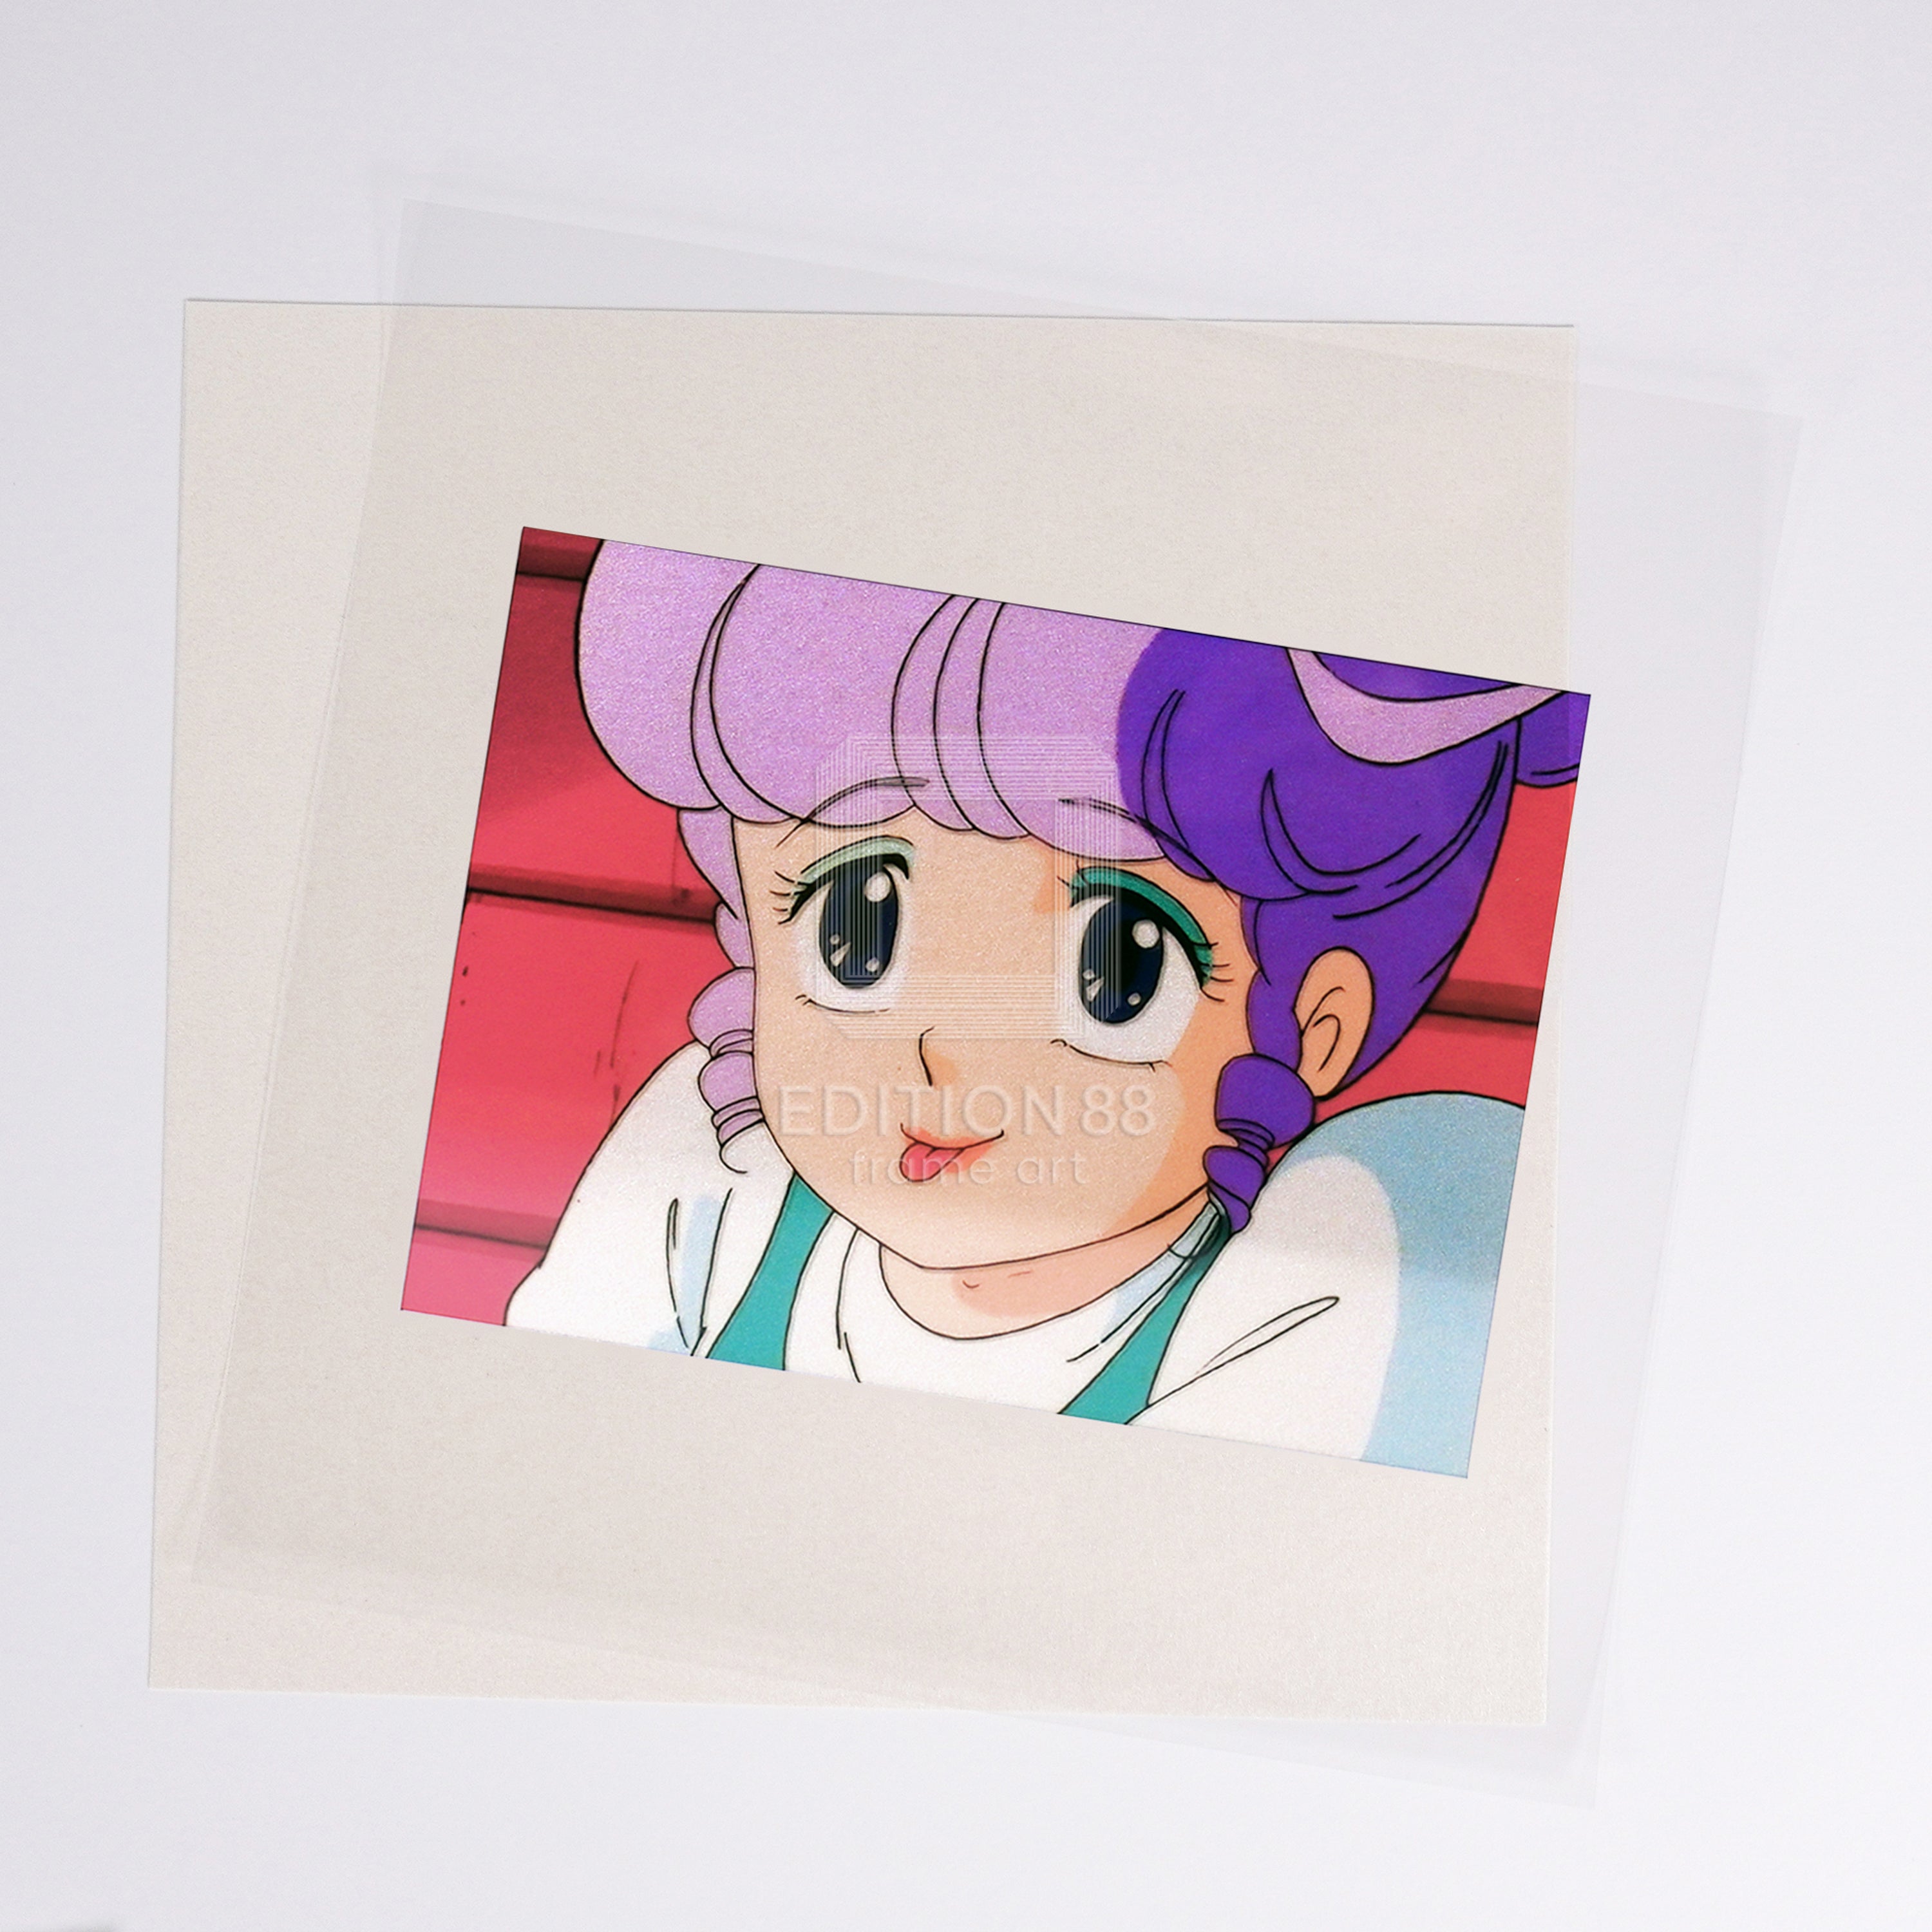 Magical Angel Creamy Mami, 88Filmgraph #10 ’SOS! Escape from the Dream Storm’